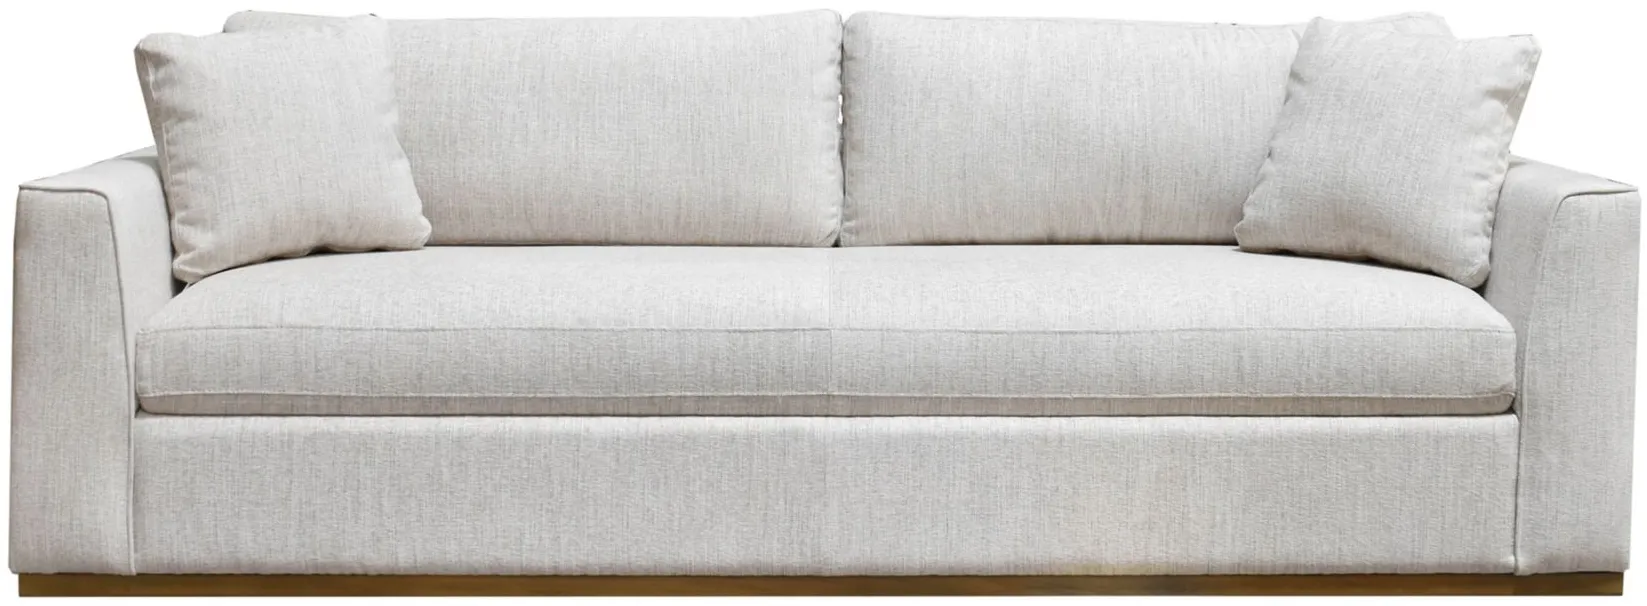 Anderson Sofa in Woven Linen by LH Imports Ltd